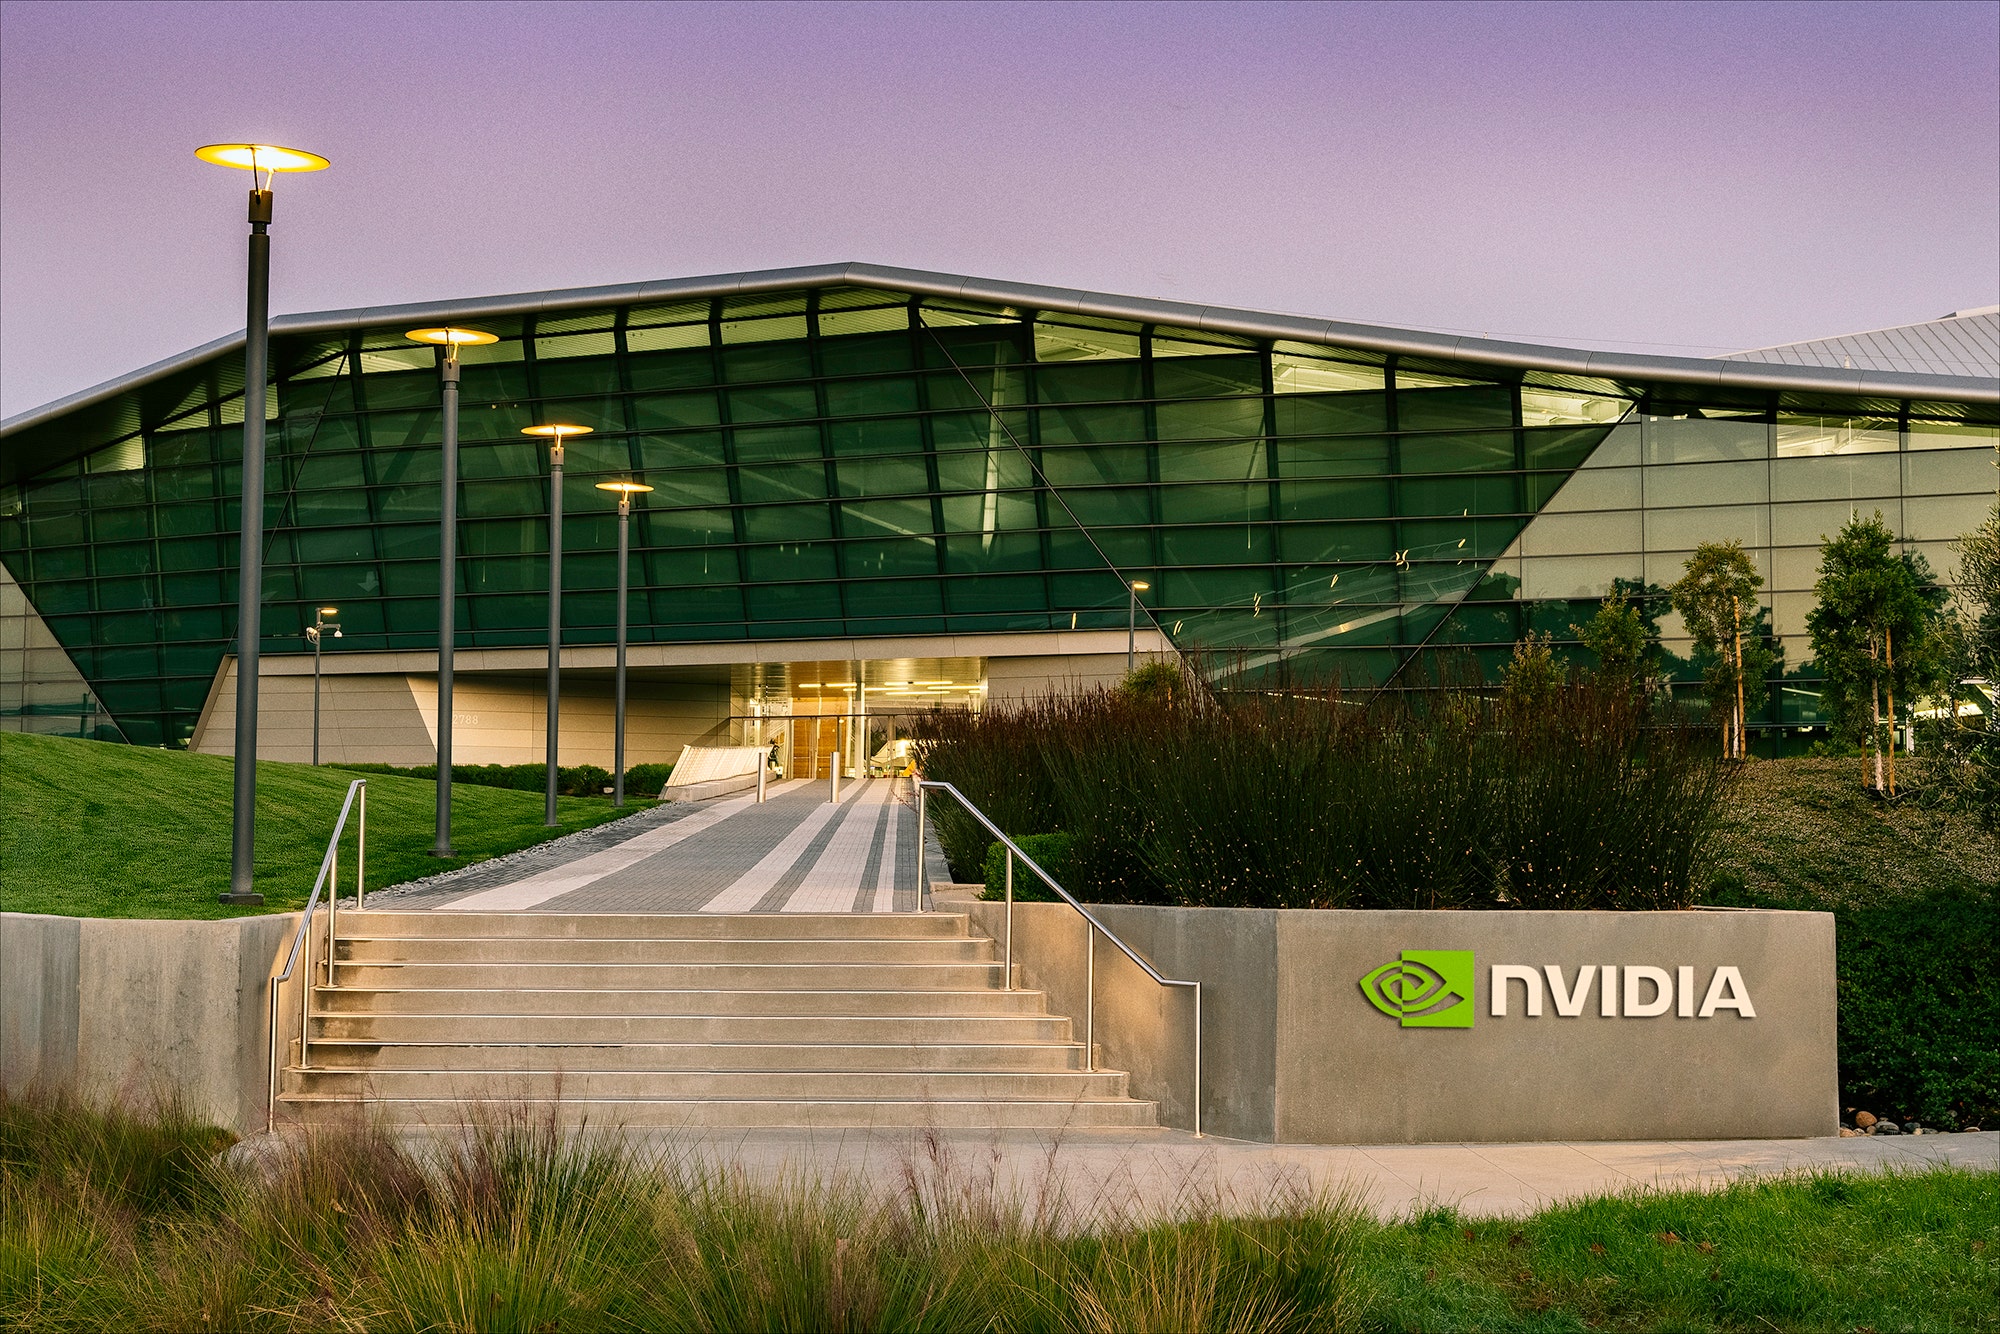 Why Nvidia Analysts Reaffirm Bullish Stance And Hike Price Targets Following Blowout Quarter;  'Path to $1 Trillion Club Evident'